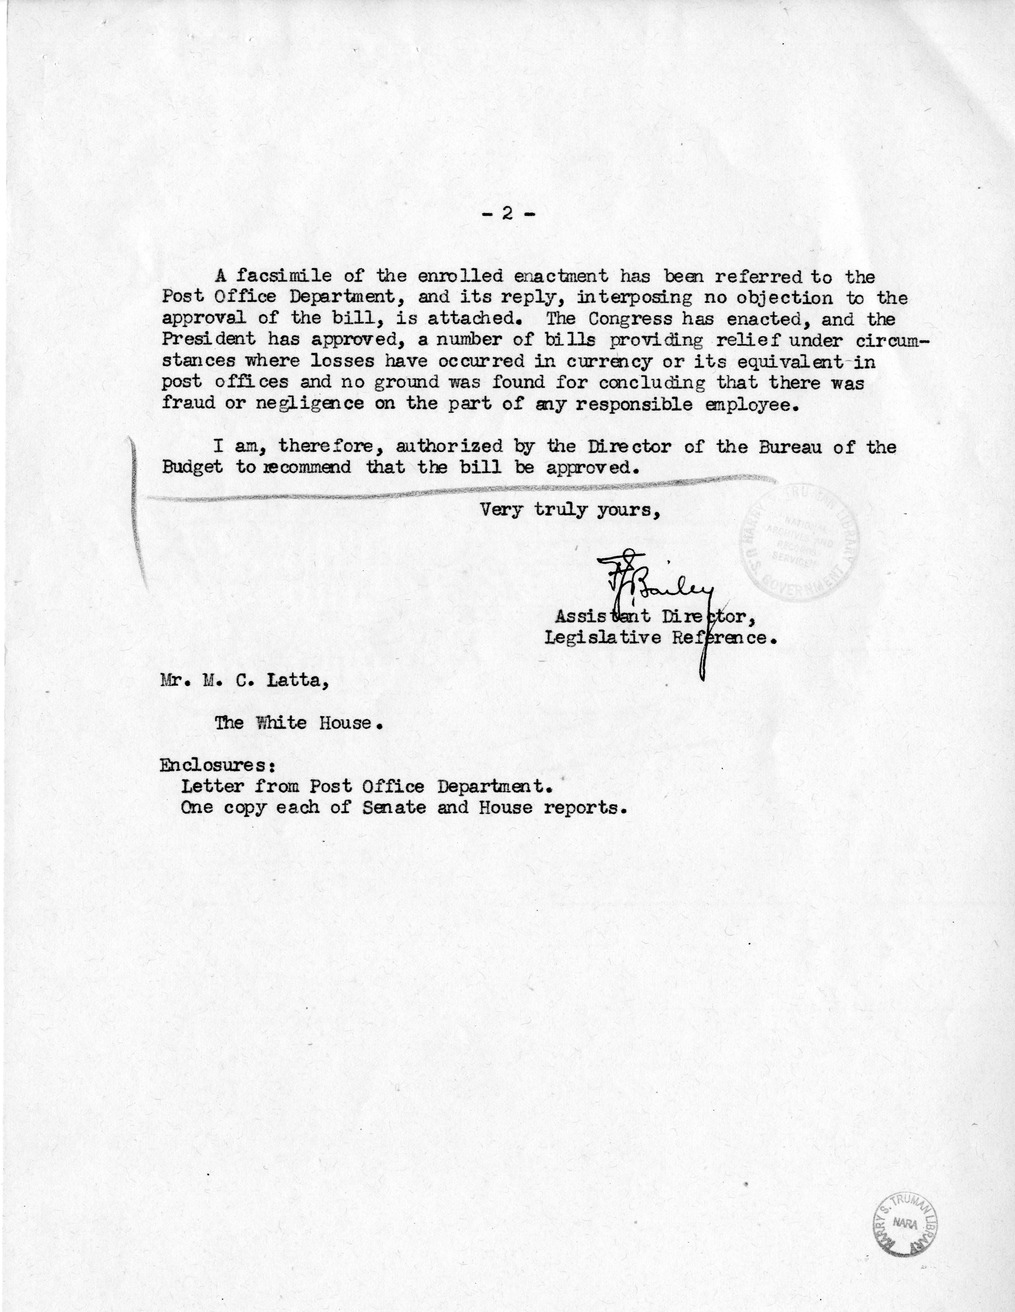 Memorandum from Frederick J. Bailey to M. C. Latta, H.R. 1456, for the Relief of George E. Baker, with Attachments